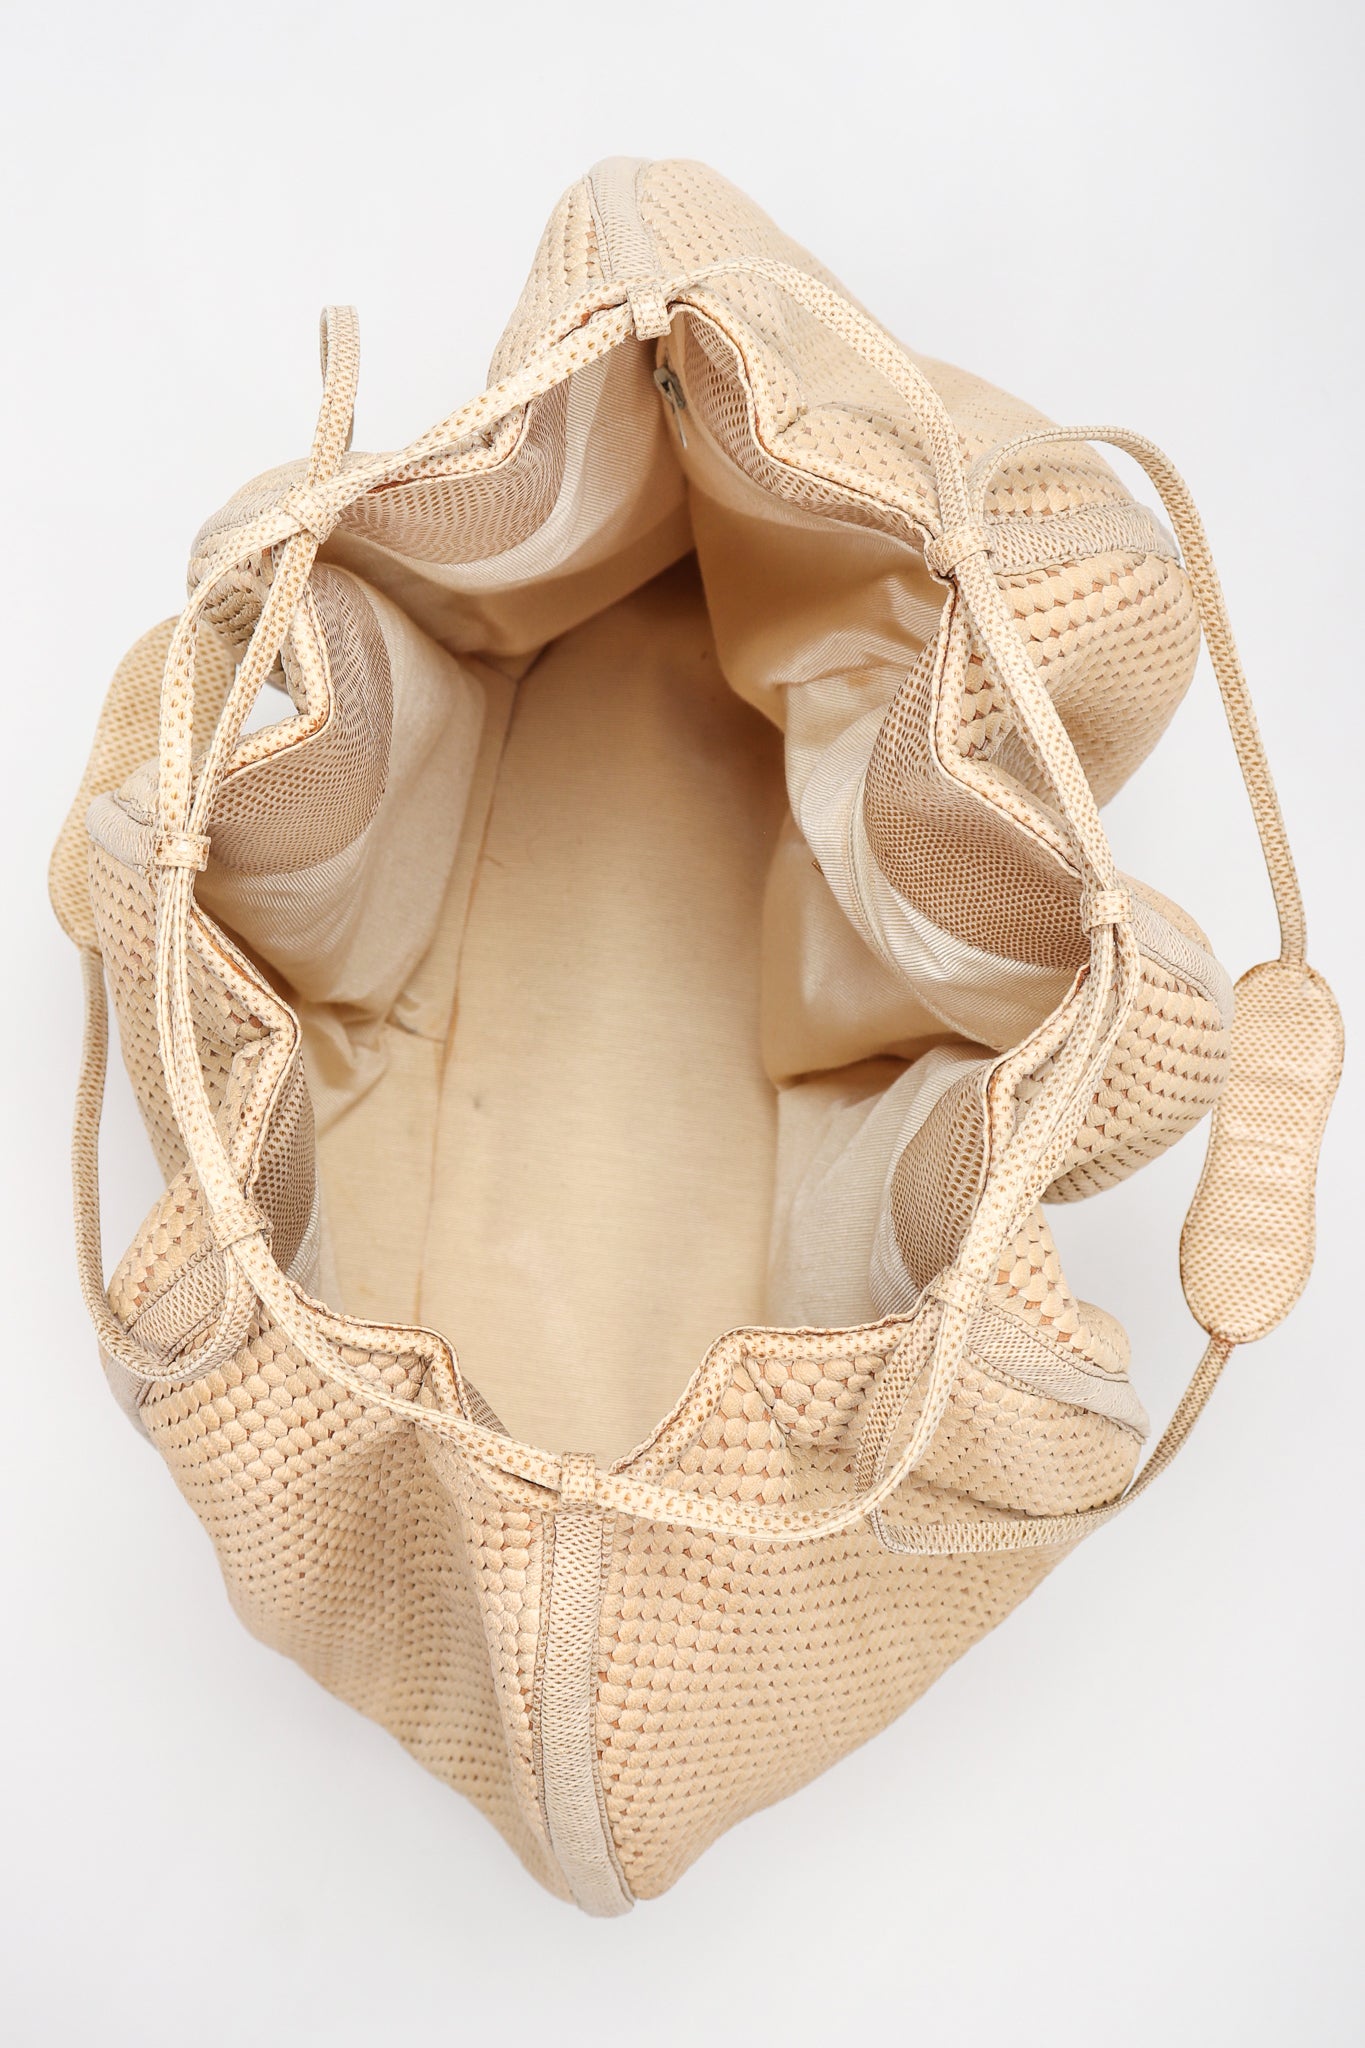 Recess Los Angeles Designer Consignment Vintage Judith Leiber Oversized Woven Lizard Straw Bucket Bag Pouch